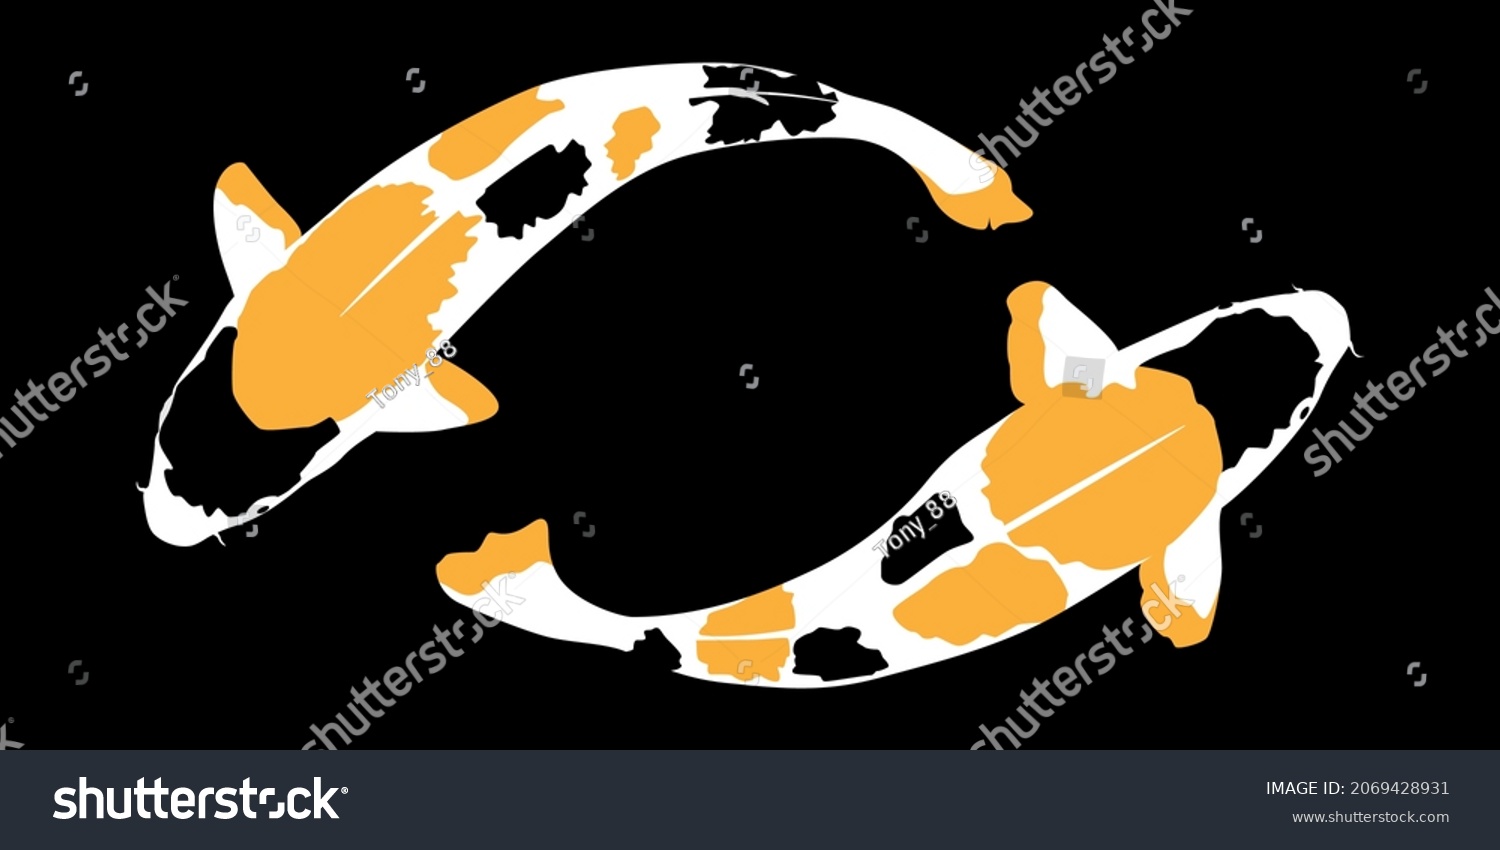 Two Japanese Carp Vector Image Royalty Free Stock Vector 2069428931